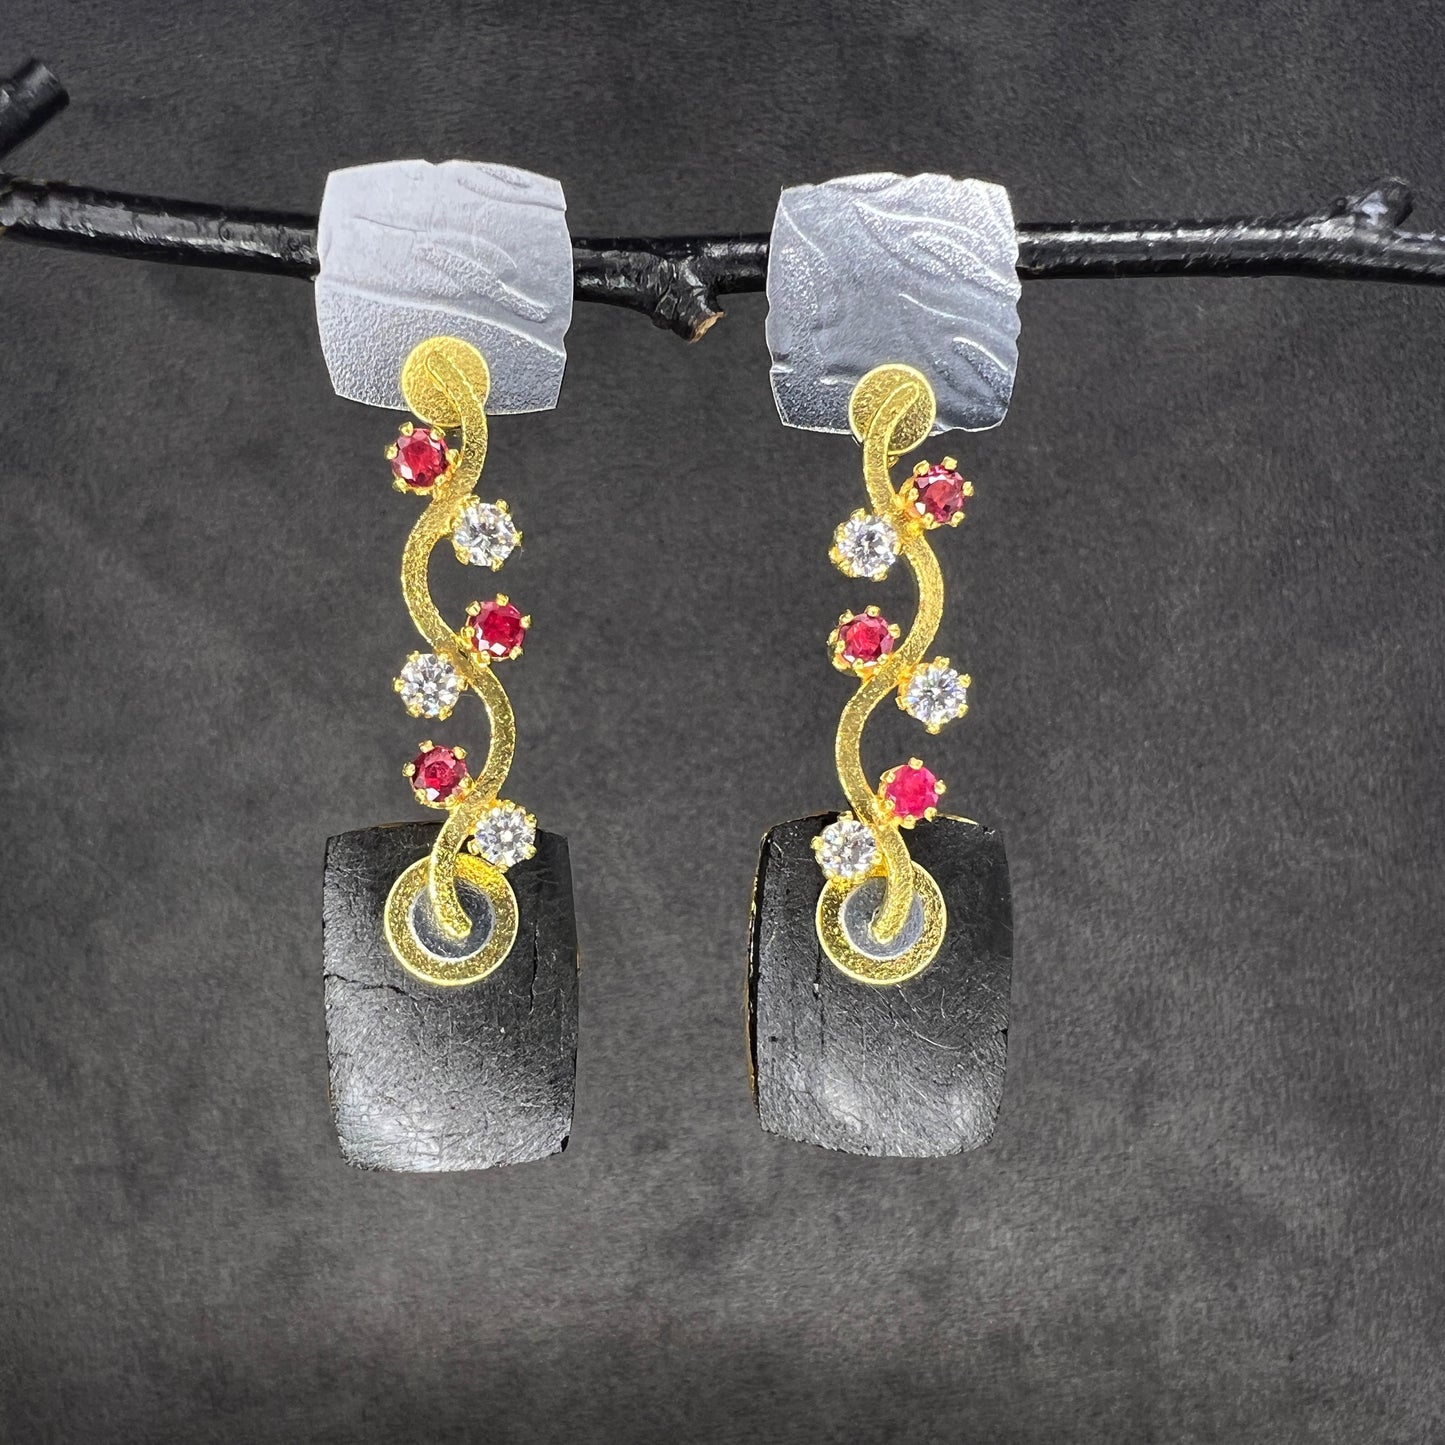 Anthracite and Ruby earrings